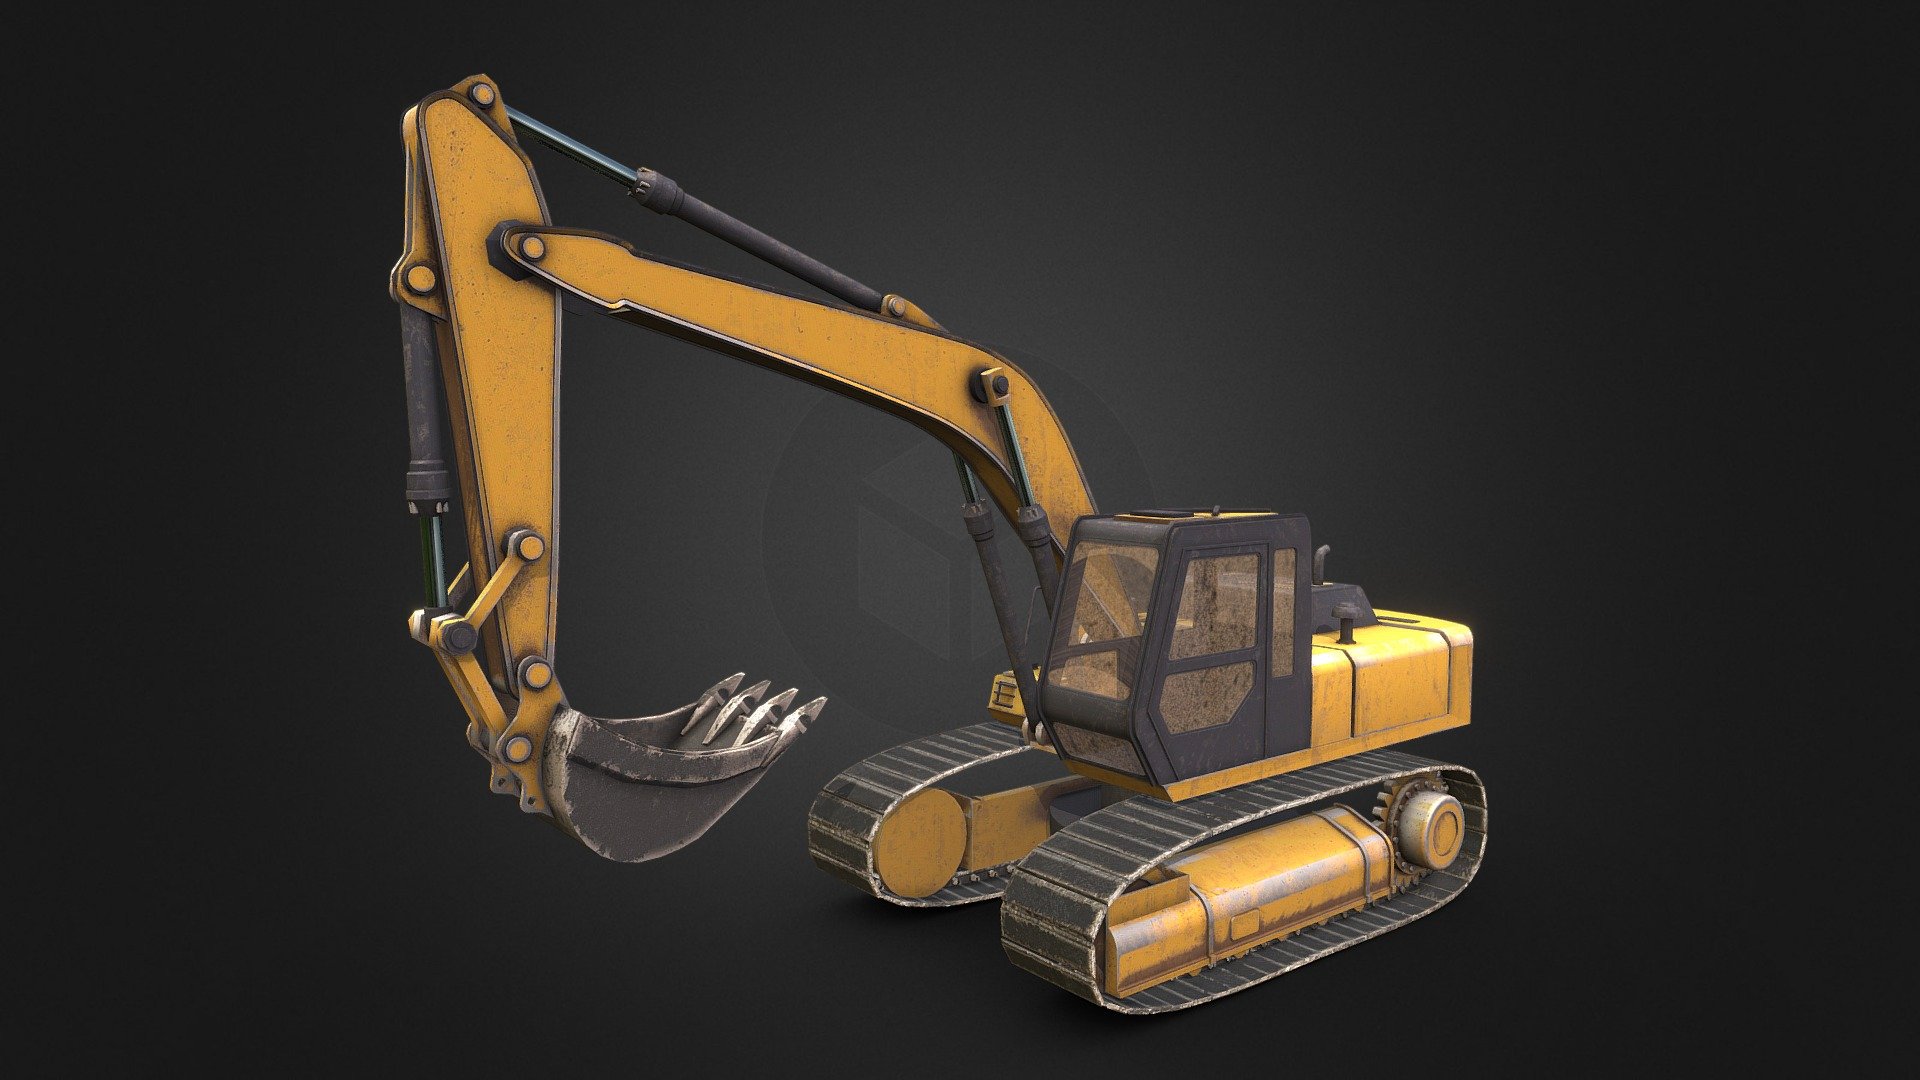 Caterpillar 330 Vehicle (Model Low Poly)
Textures Diffuse
Textures Normal

Files Extension .PNG .JPEG .MAX (2020) .FBX

Create by Aaron3D:
aarontresdesero@gmail.com - Caterpillar 330 Excavator - Buy Royalty Free 3D model by Aaron3D (@Aarontresde) 3d model